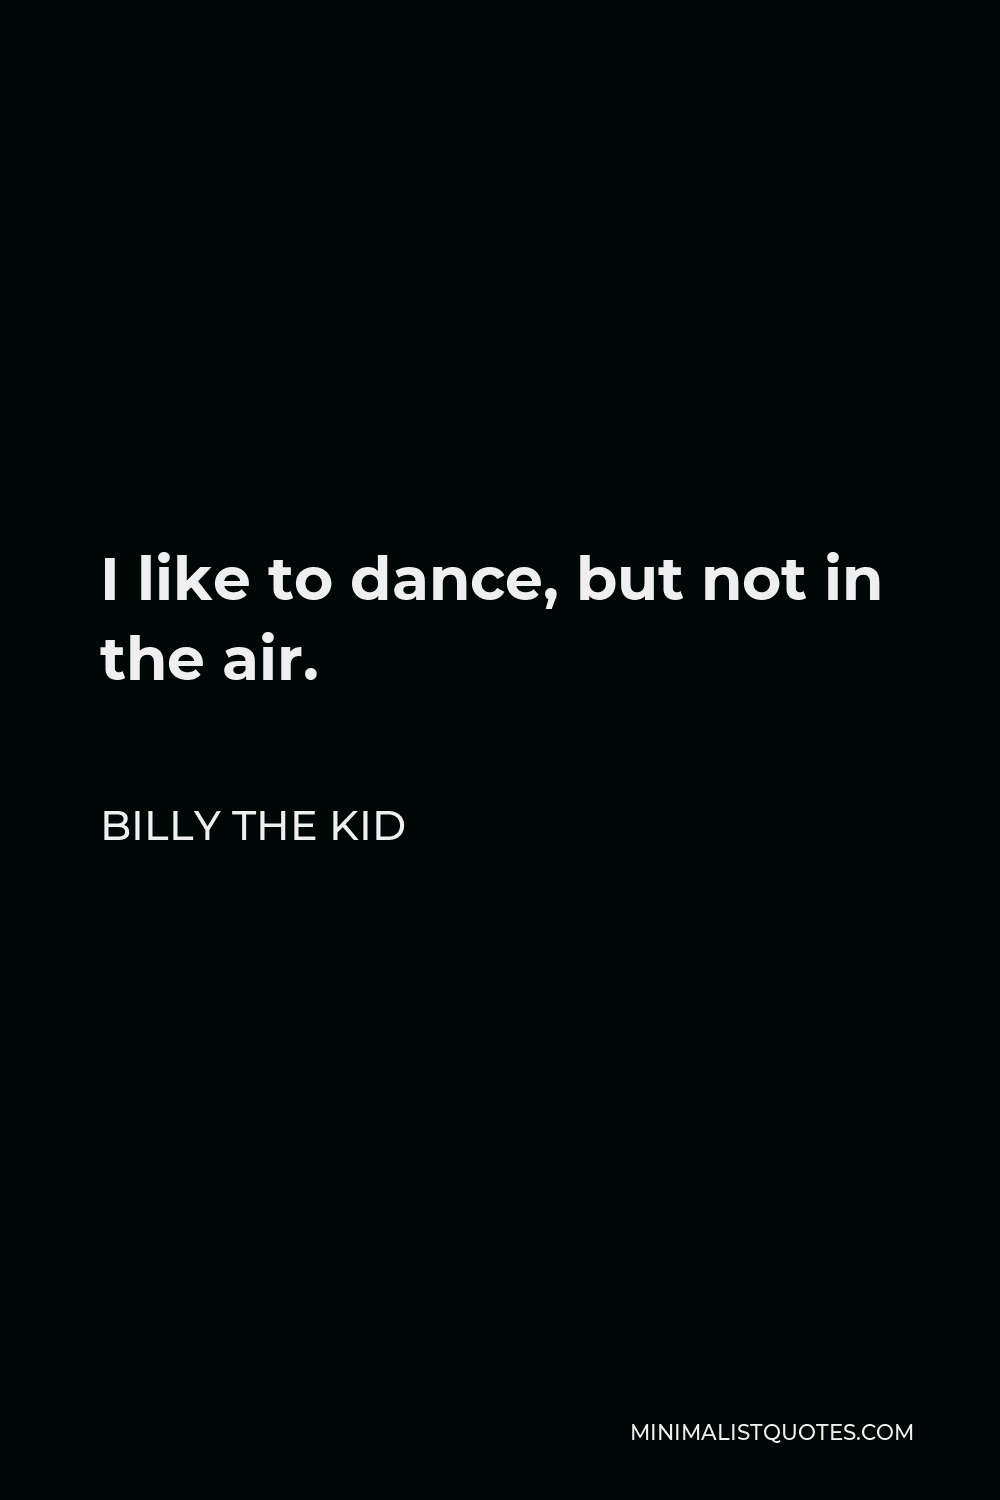 Billy the Kid Quote - I like to dance, but not in the air.